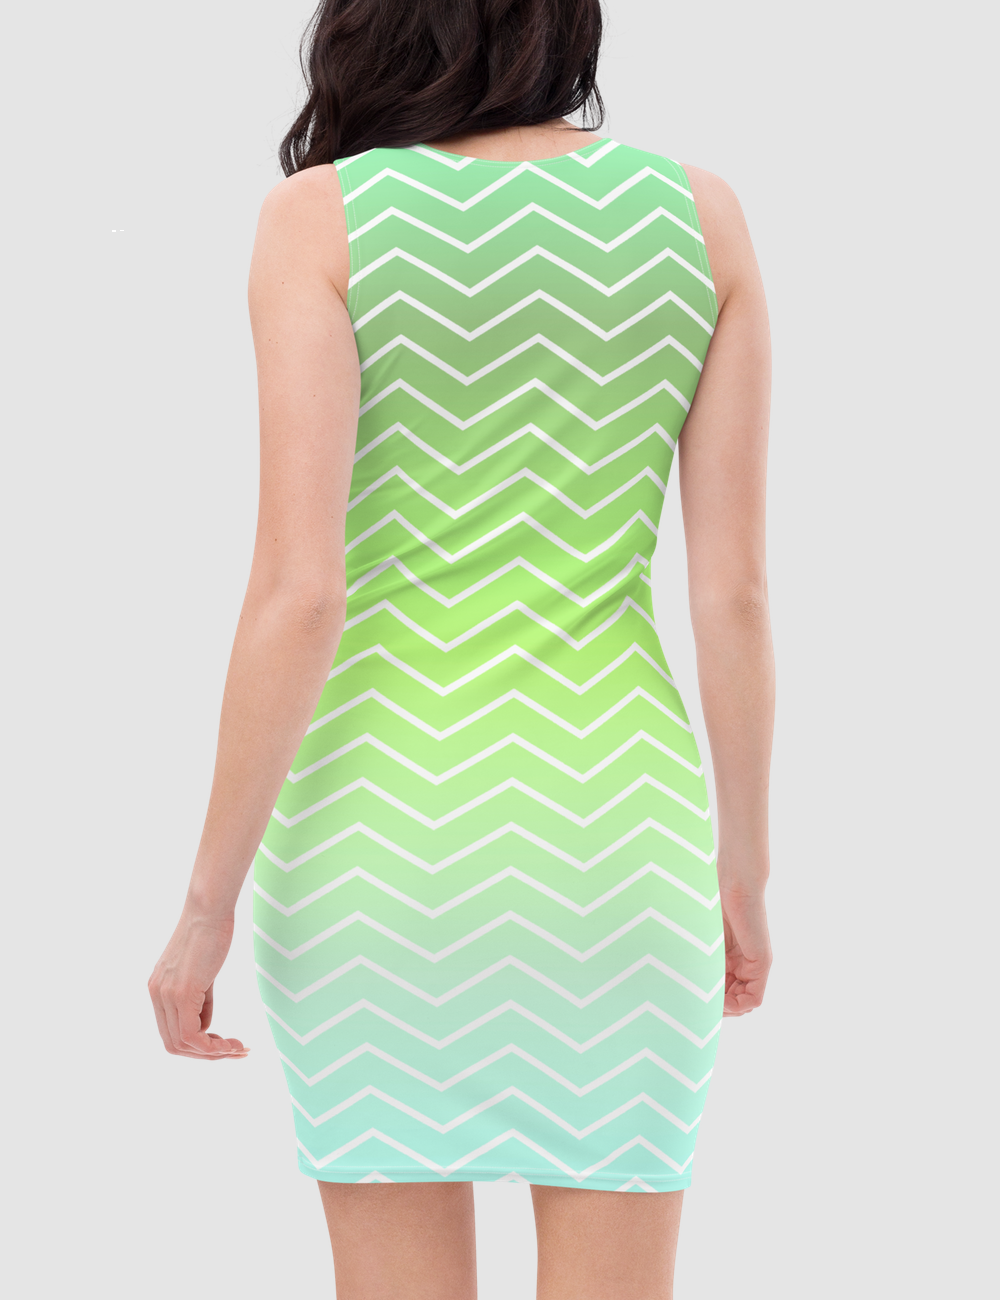 Neon Green Chevron Ombre Women's Sleeveless Fitted Sublimated Dress OniTakai